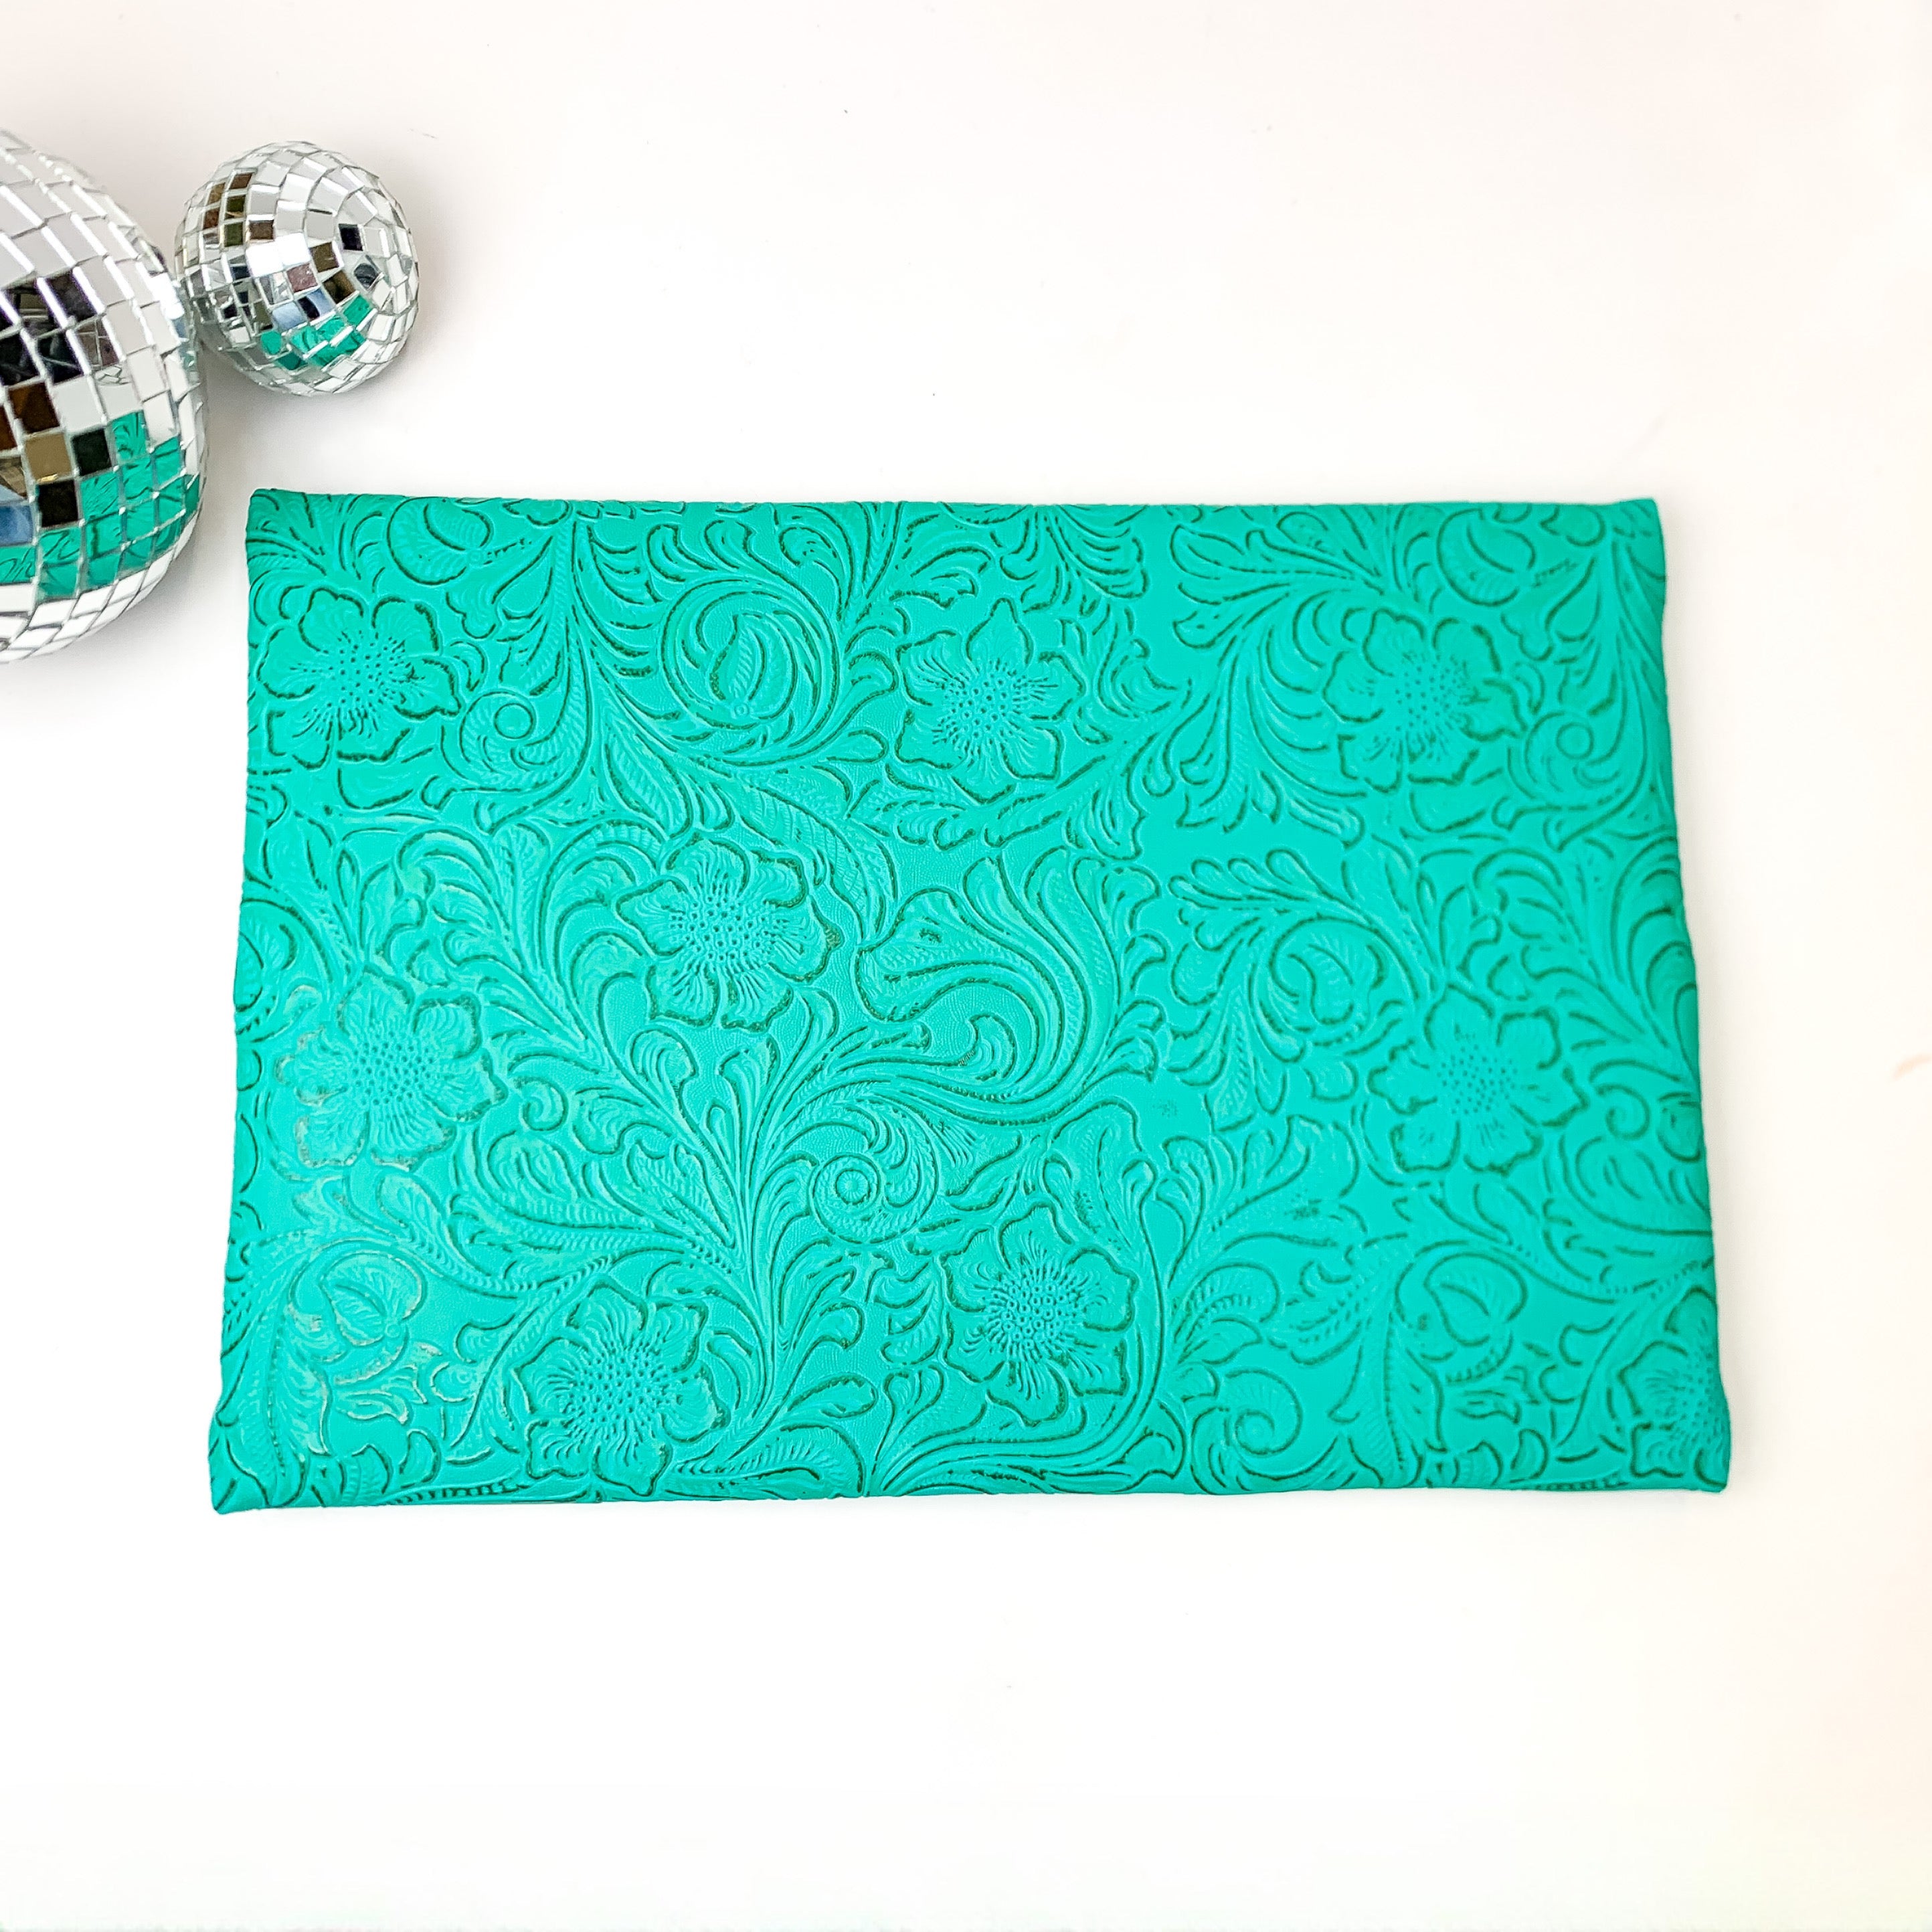 Makeup Junkie | Medium Turquoise Dream Lay Flat Bag in Turquoise Green Tooled Print - Giddy Up Glamour Boutique